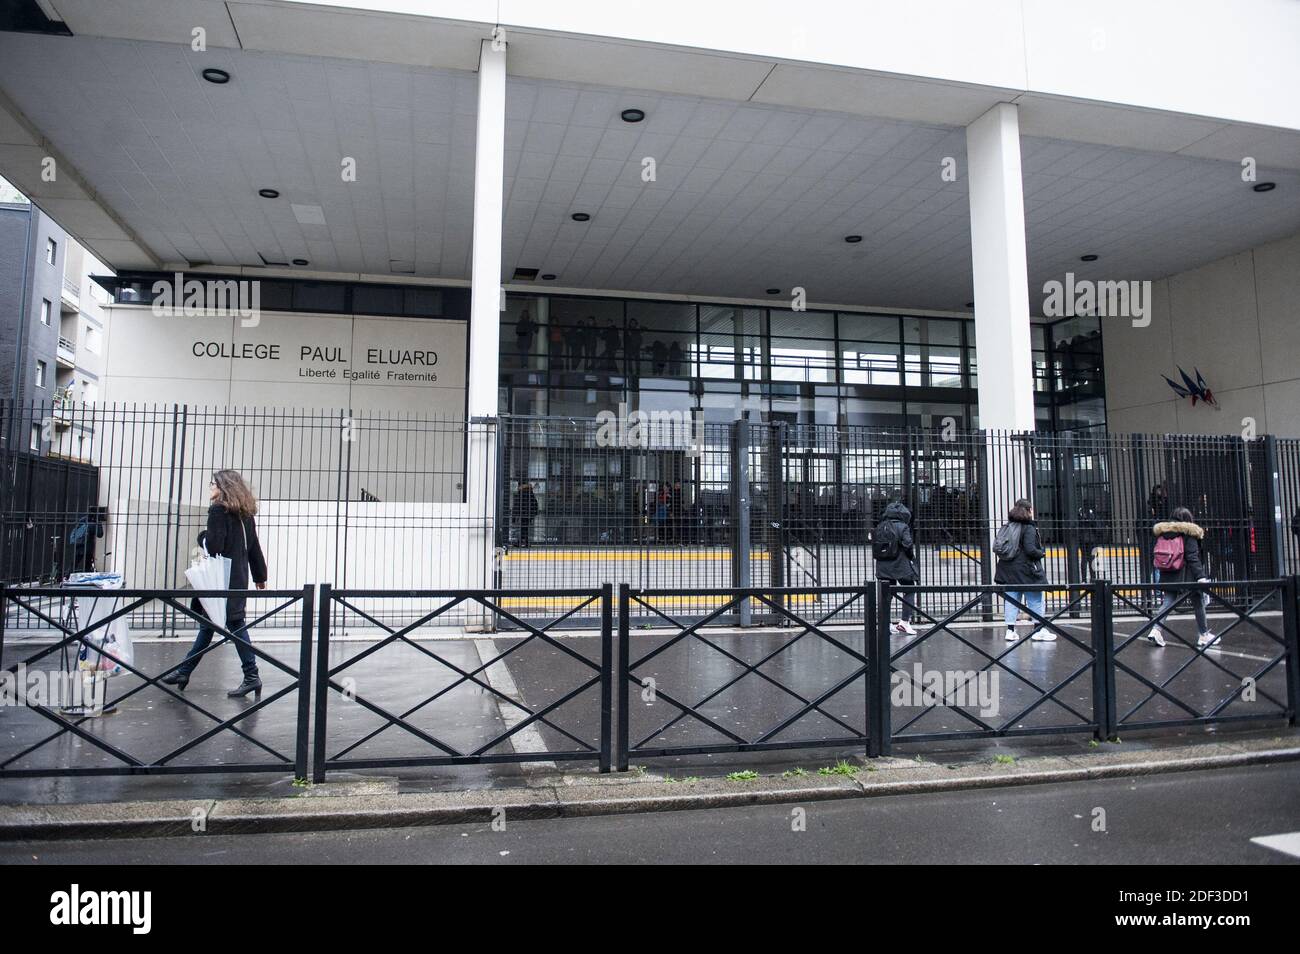 The Collège Paul-Eluard in Montreuil seine saint denis ile de france where a pupil is infected with the coronavirus Covid-19 and was hospitalized in Necker. The college is still open, Montreuil, France on 2 march, 2020 Photo by Magali Cohen/ABACAPRESS.COM Stock Photo